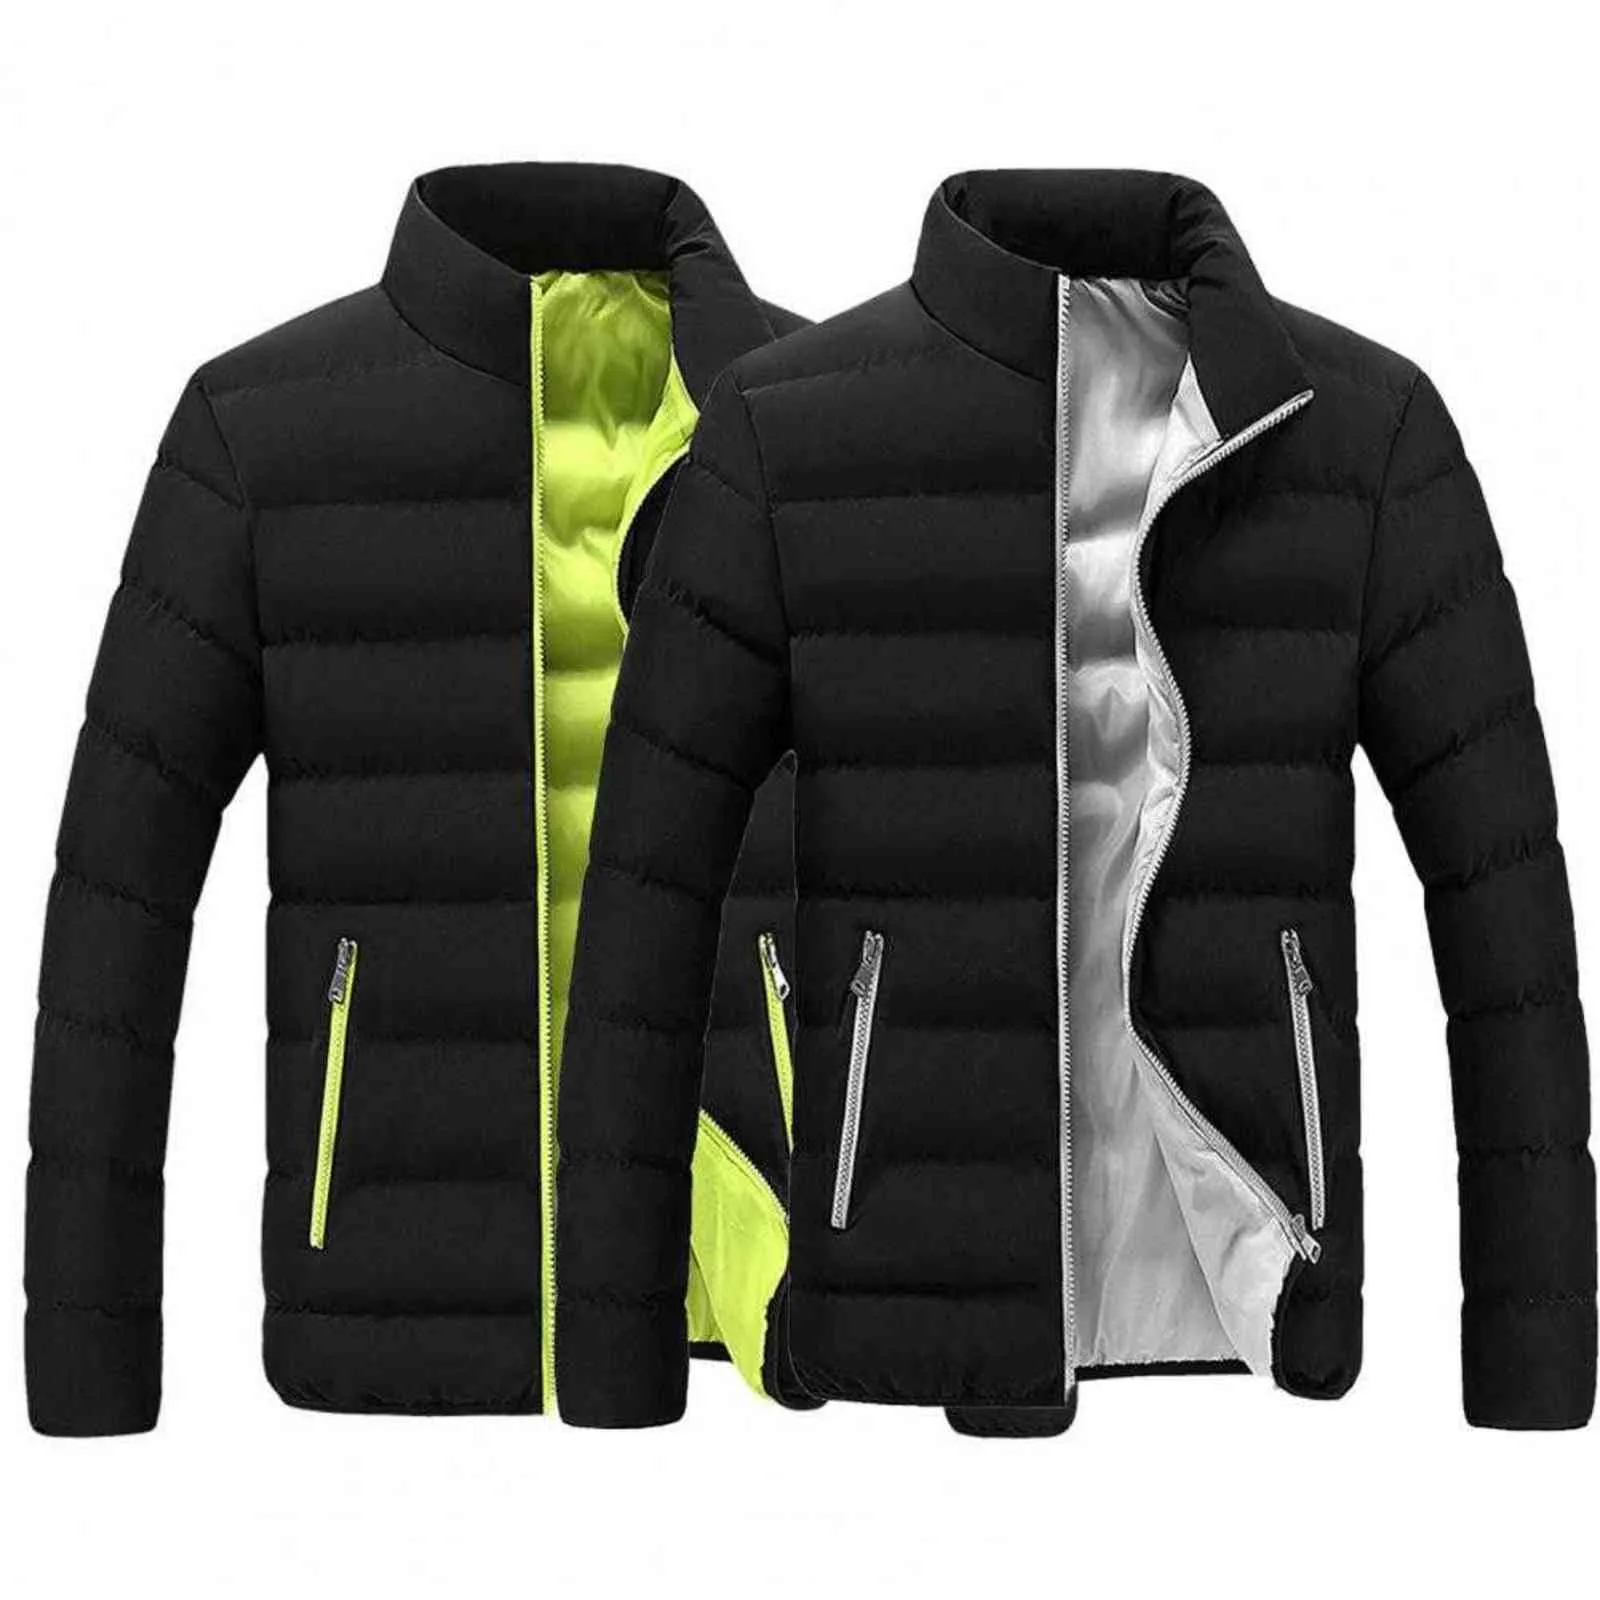 Brand Winter Jacket Men size 5XL Warm Thick Windbreaker High Quality Fleece Cotton-Padded Parkas Military Overcoat clothing G1108